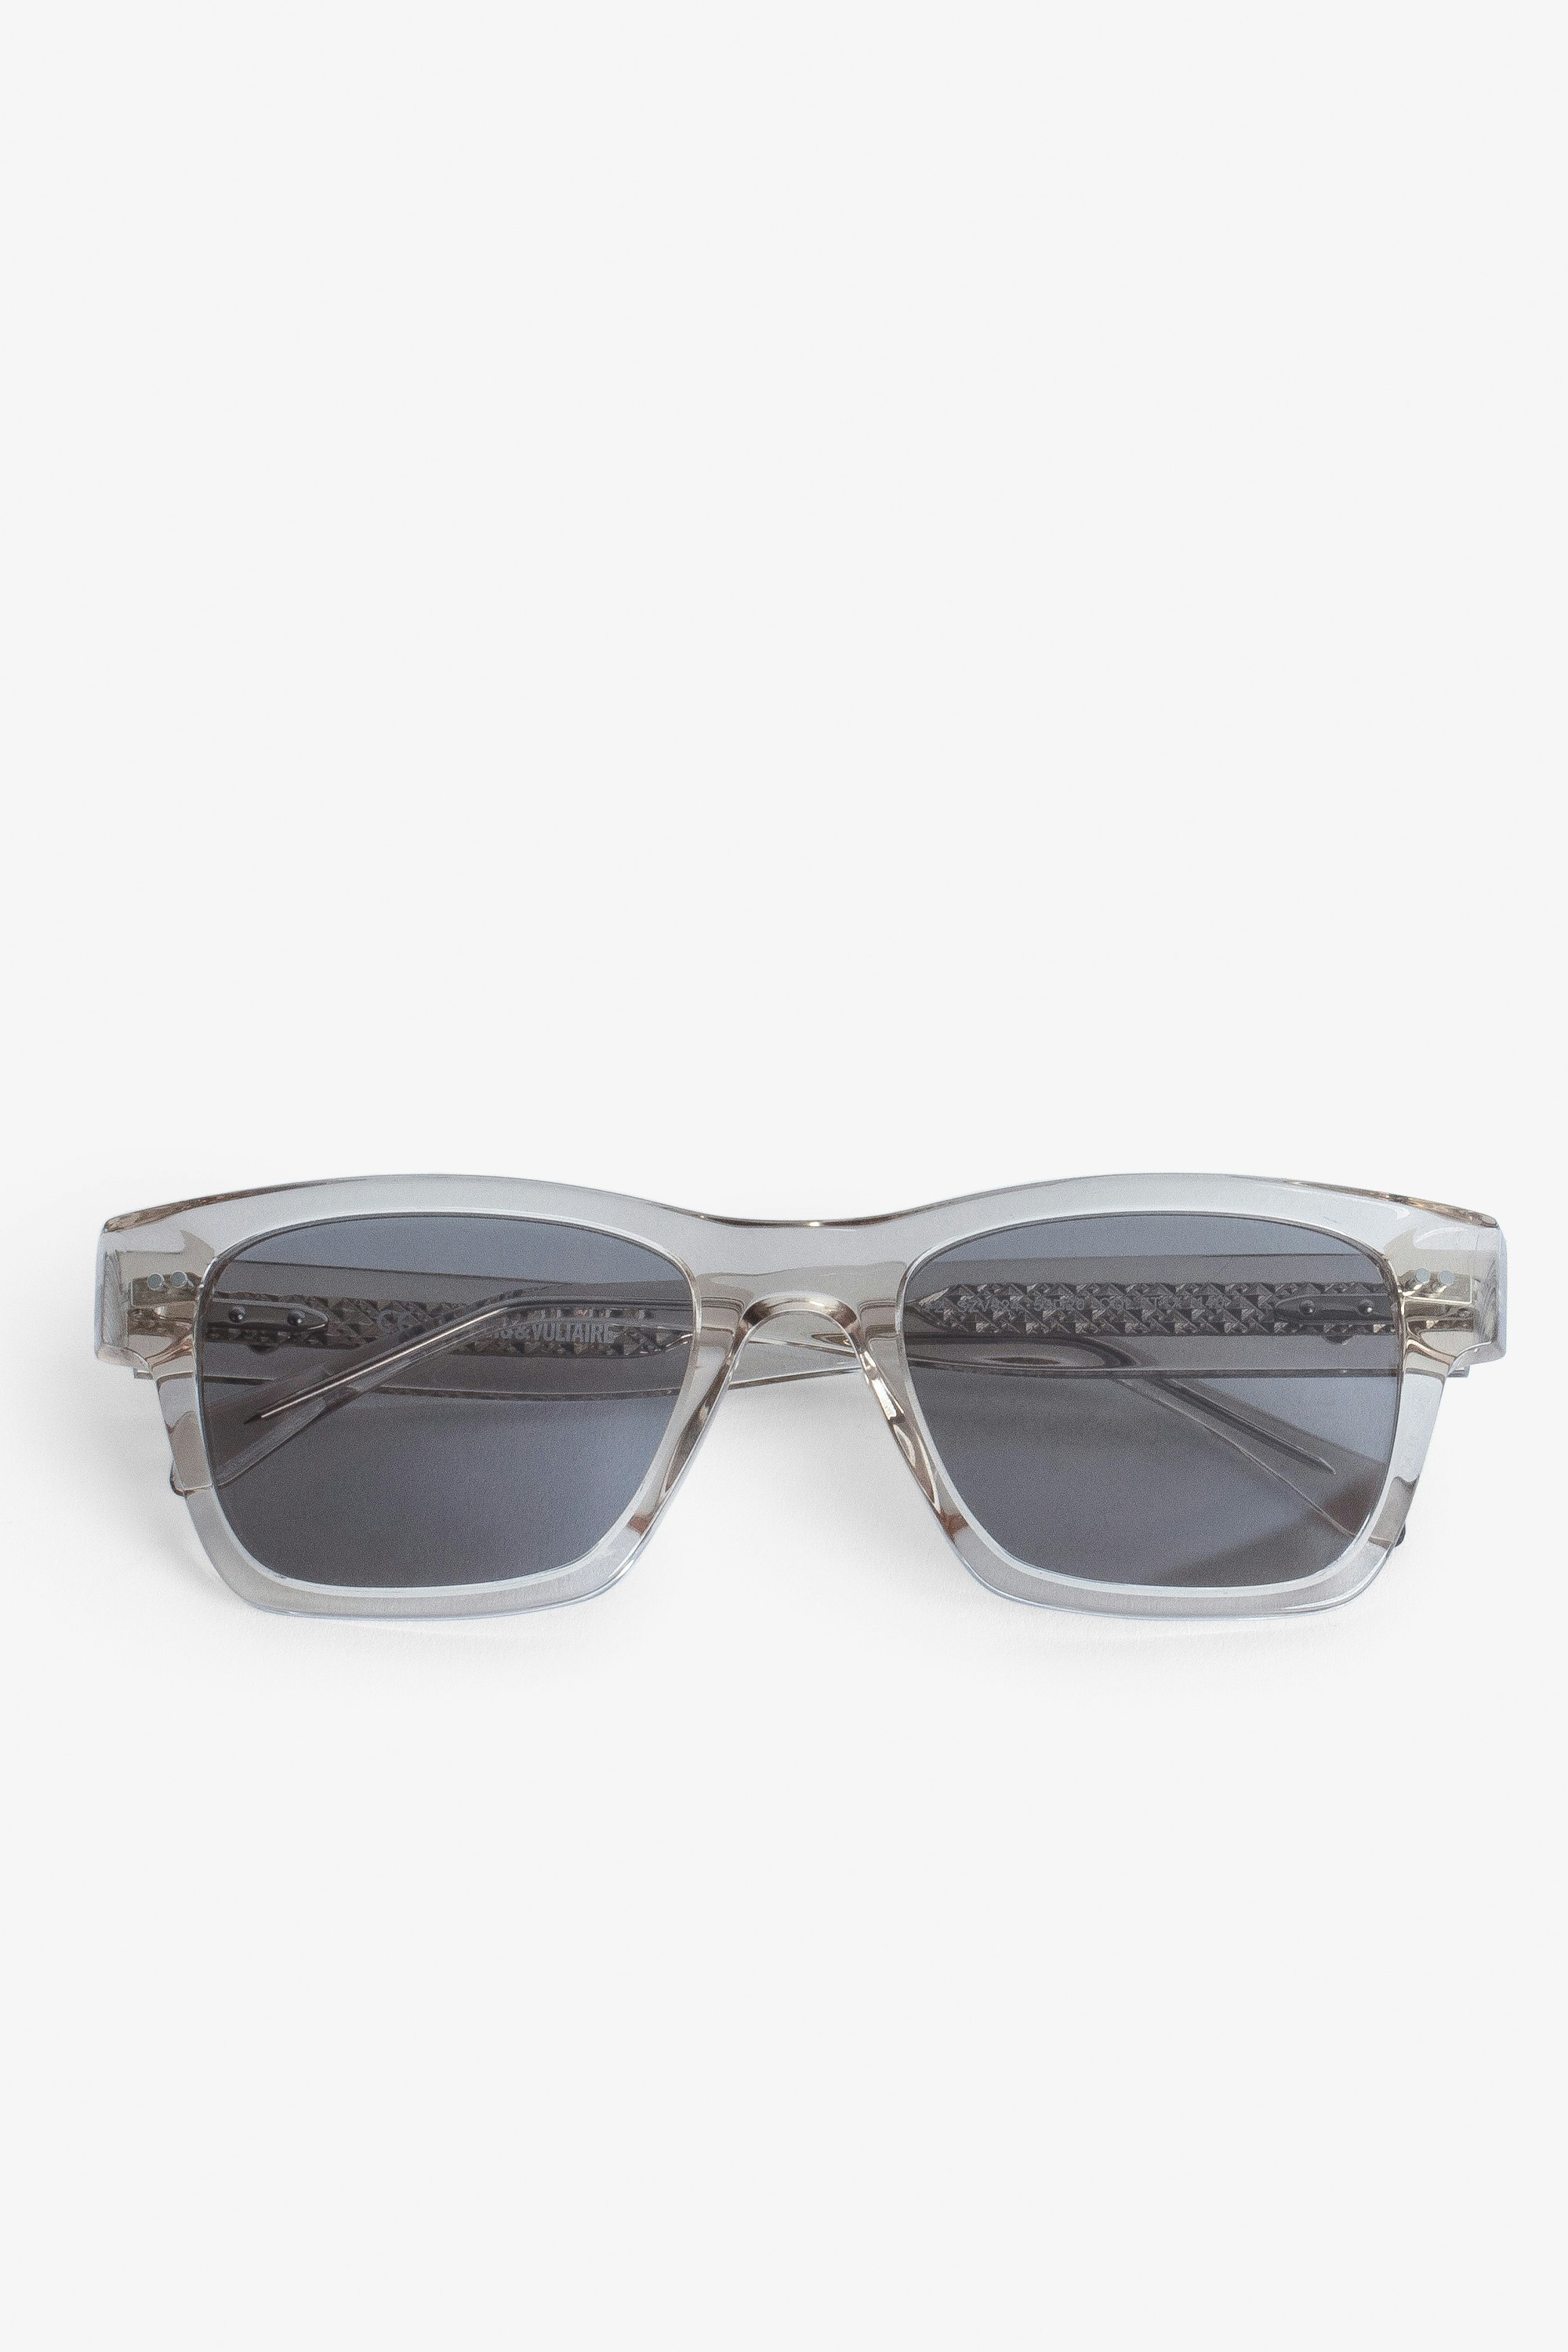 Transparent Wings Sunglasses Beige acetate sunglasses with wing detailing on temples